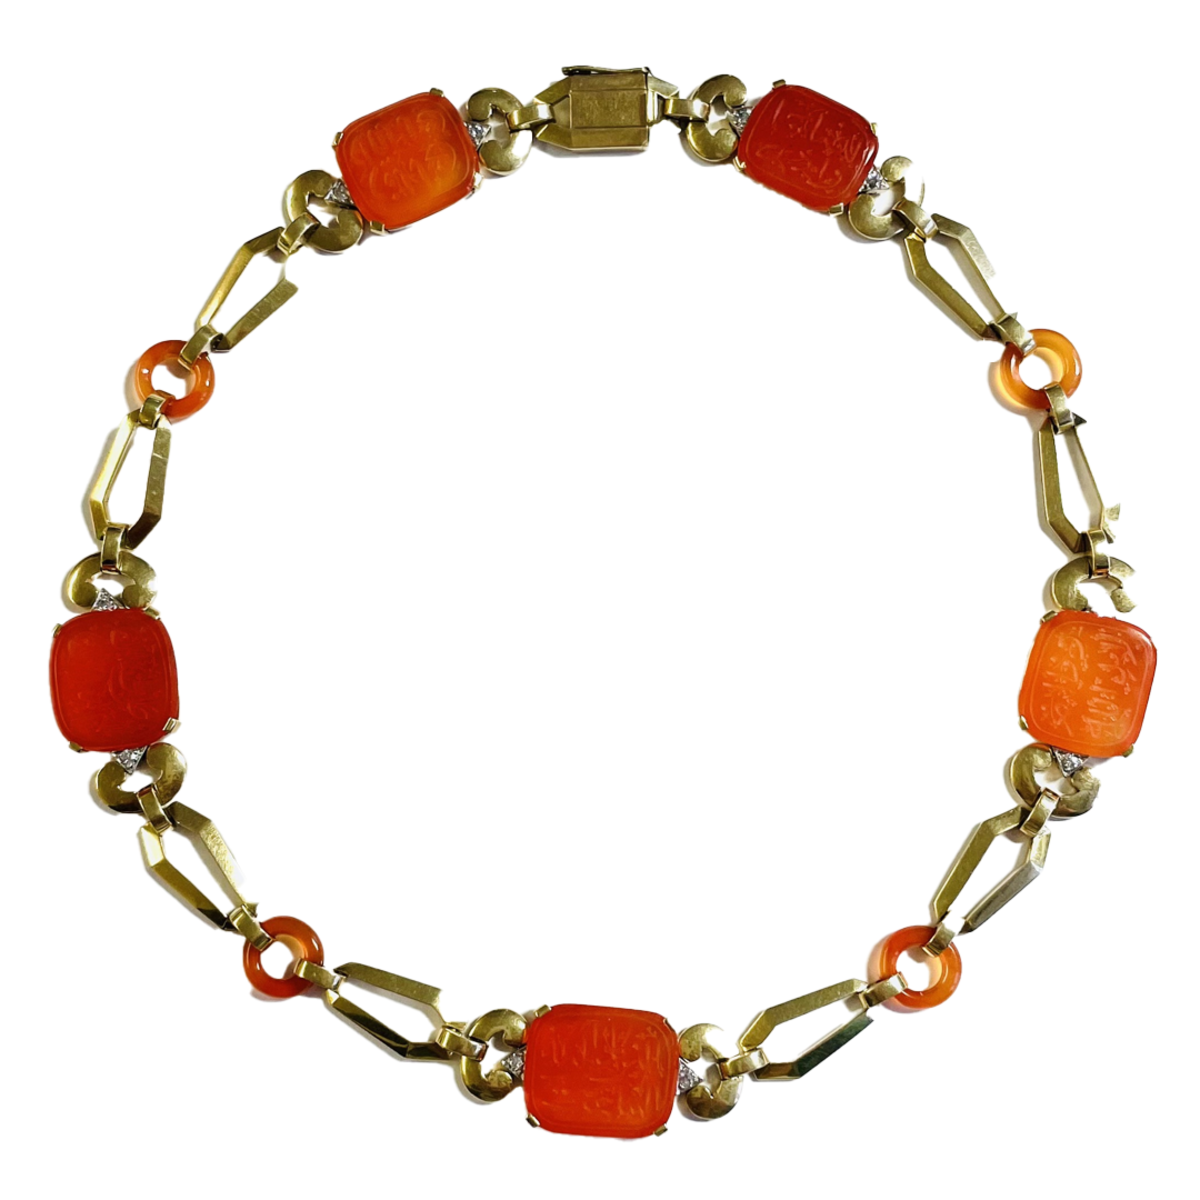 1930s 18KT White Gold Carnelian Agate & Diamond Necklace front